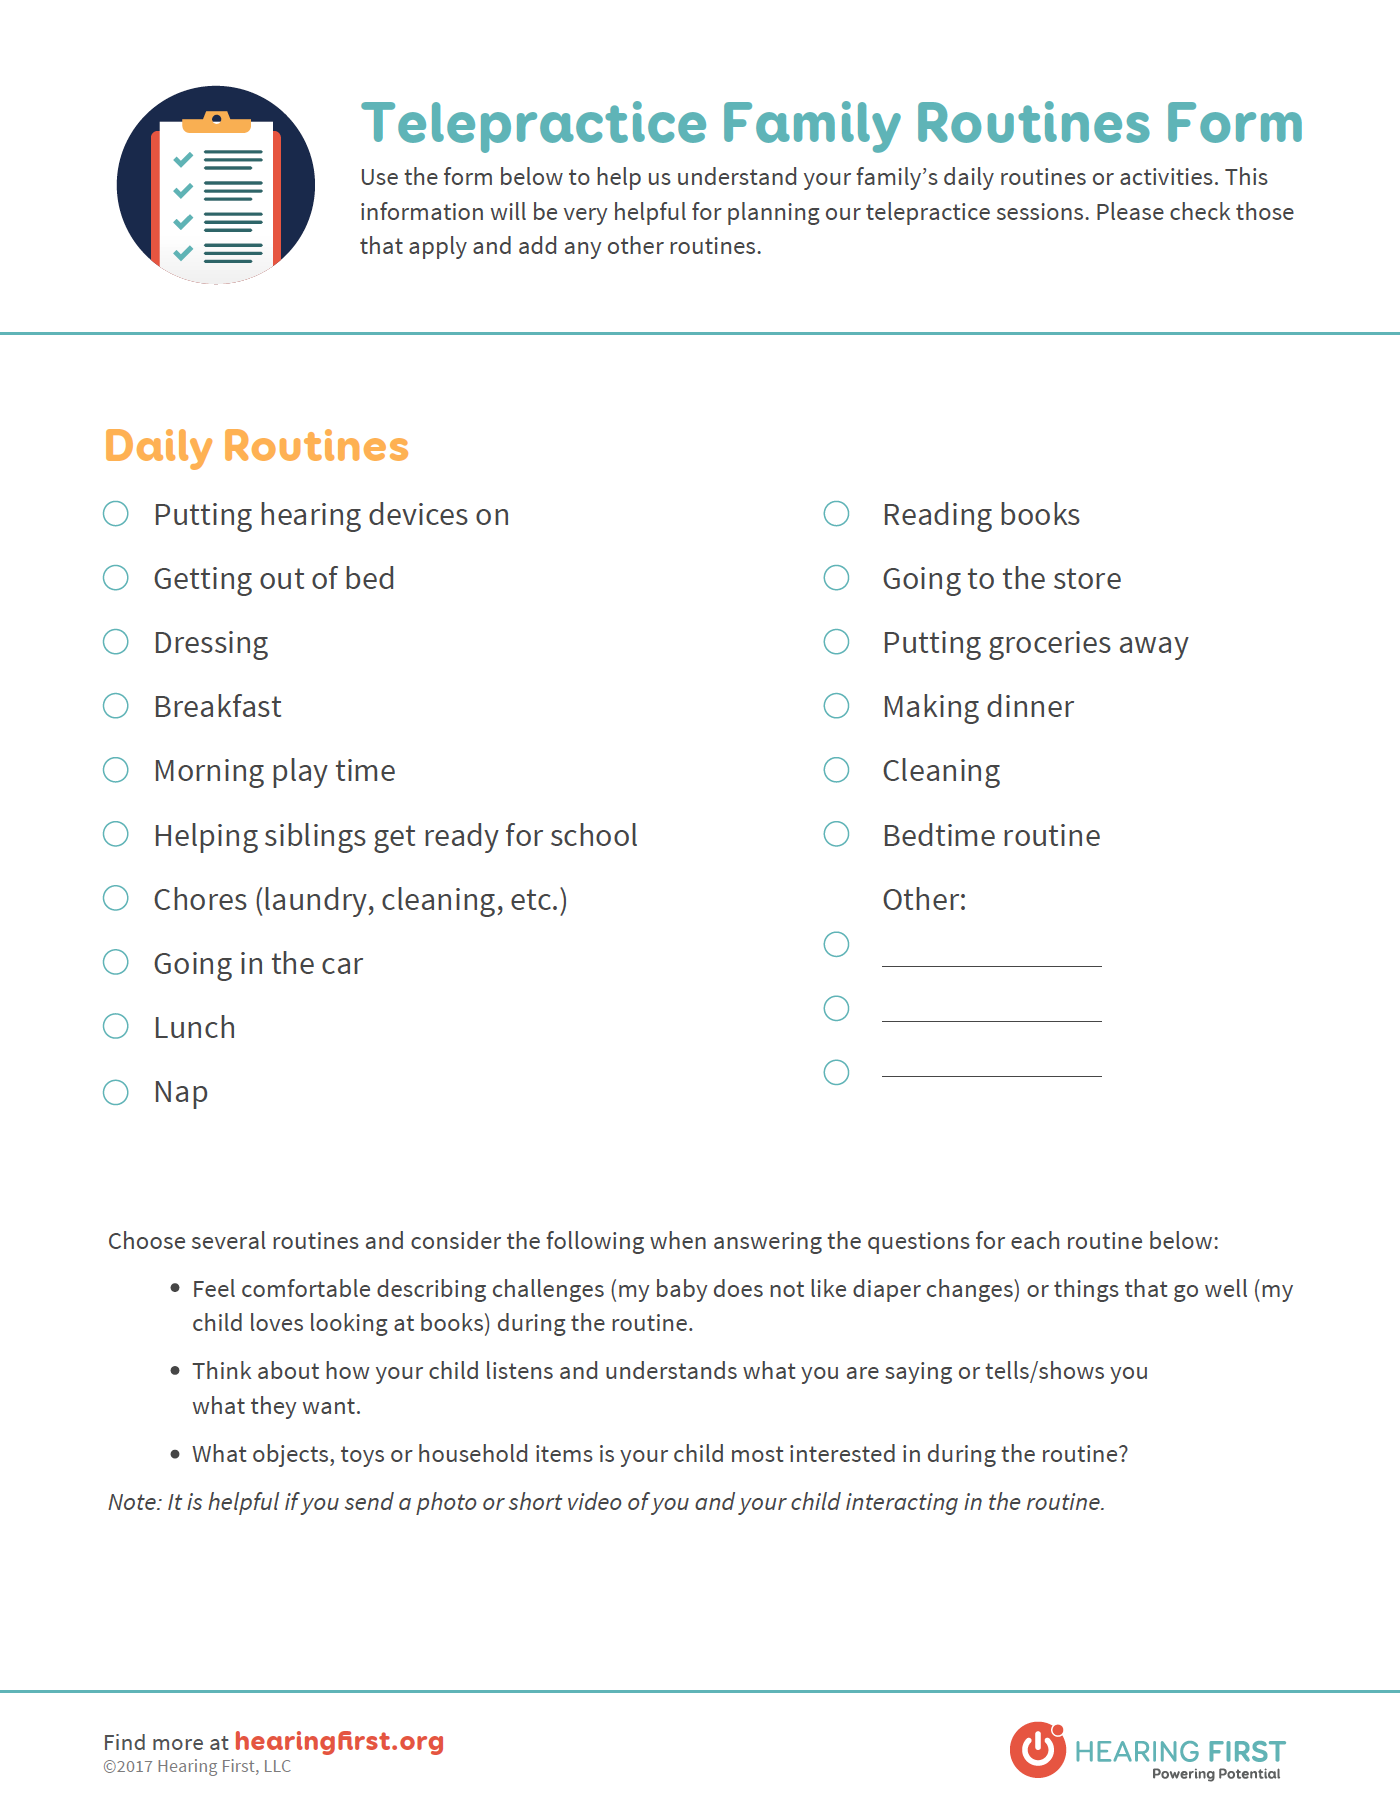 Preview of Telepractice Family Routines Form PDF